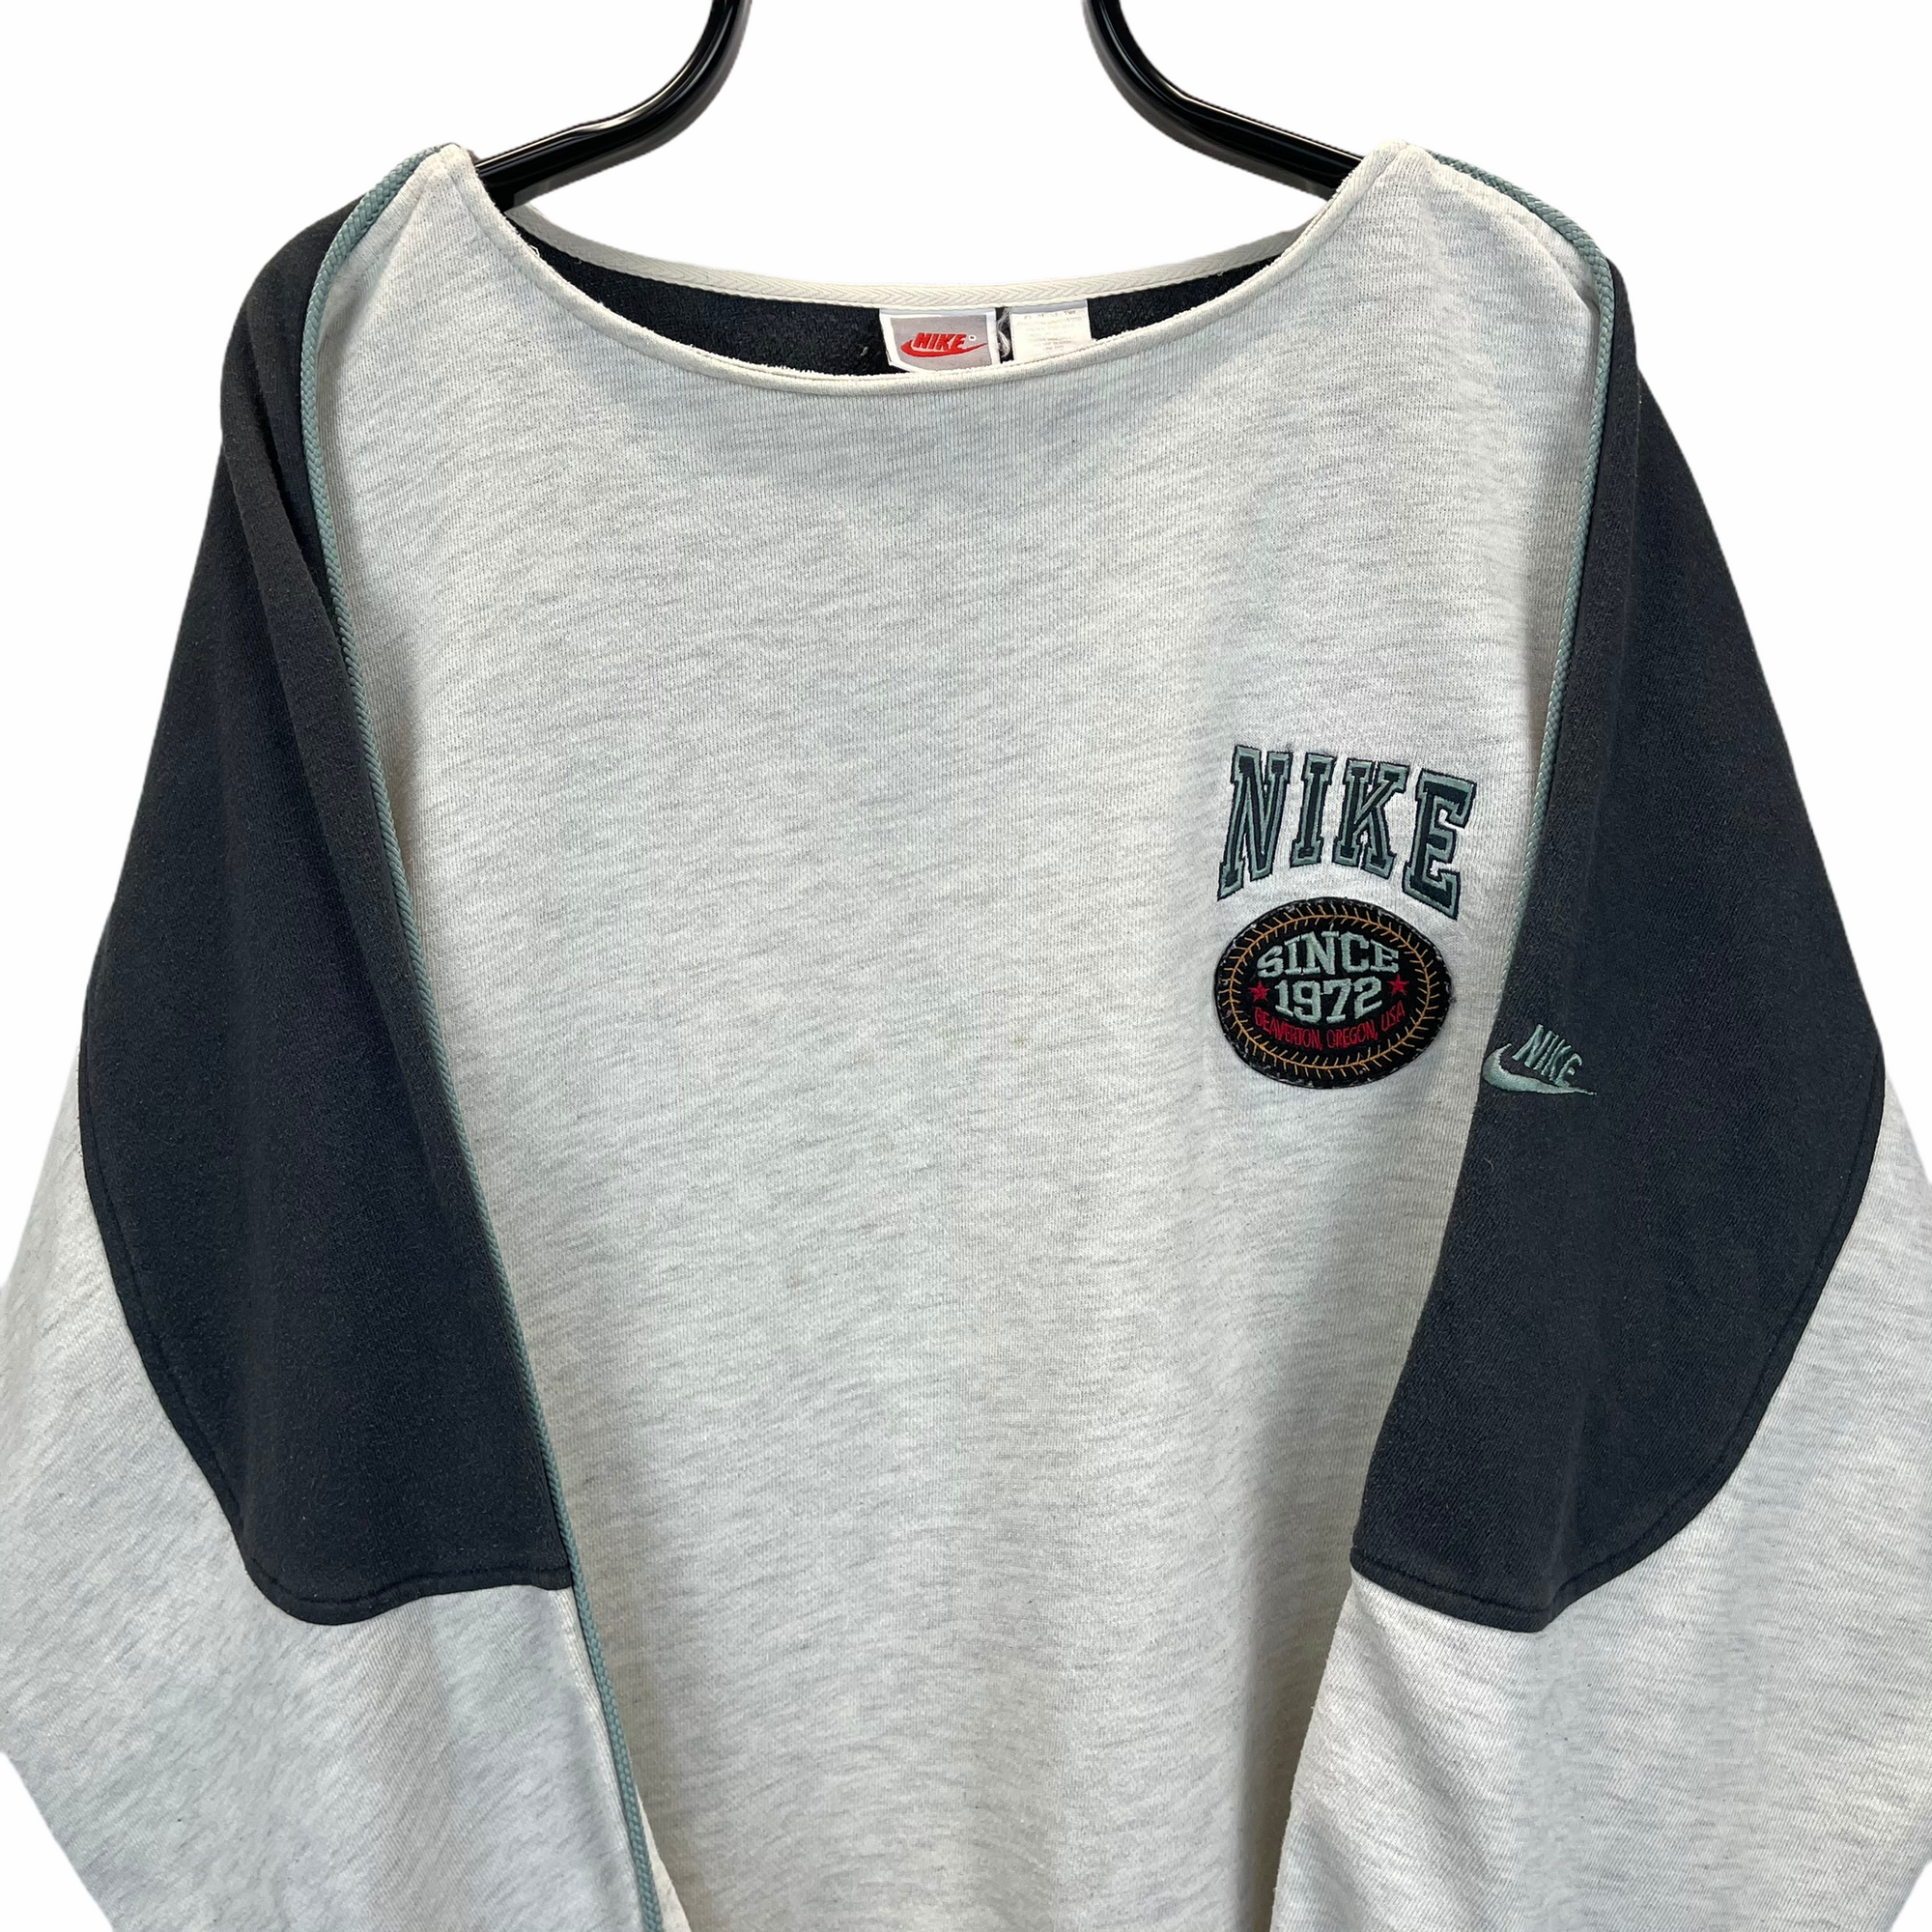 VINTAGE 80S NIKE EMBROIDERED SMALL SPELLOUT SWEATSHIRT IN GREY & WASHED BLACK - MEN'S XL/WOMEN'S XXL